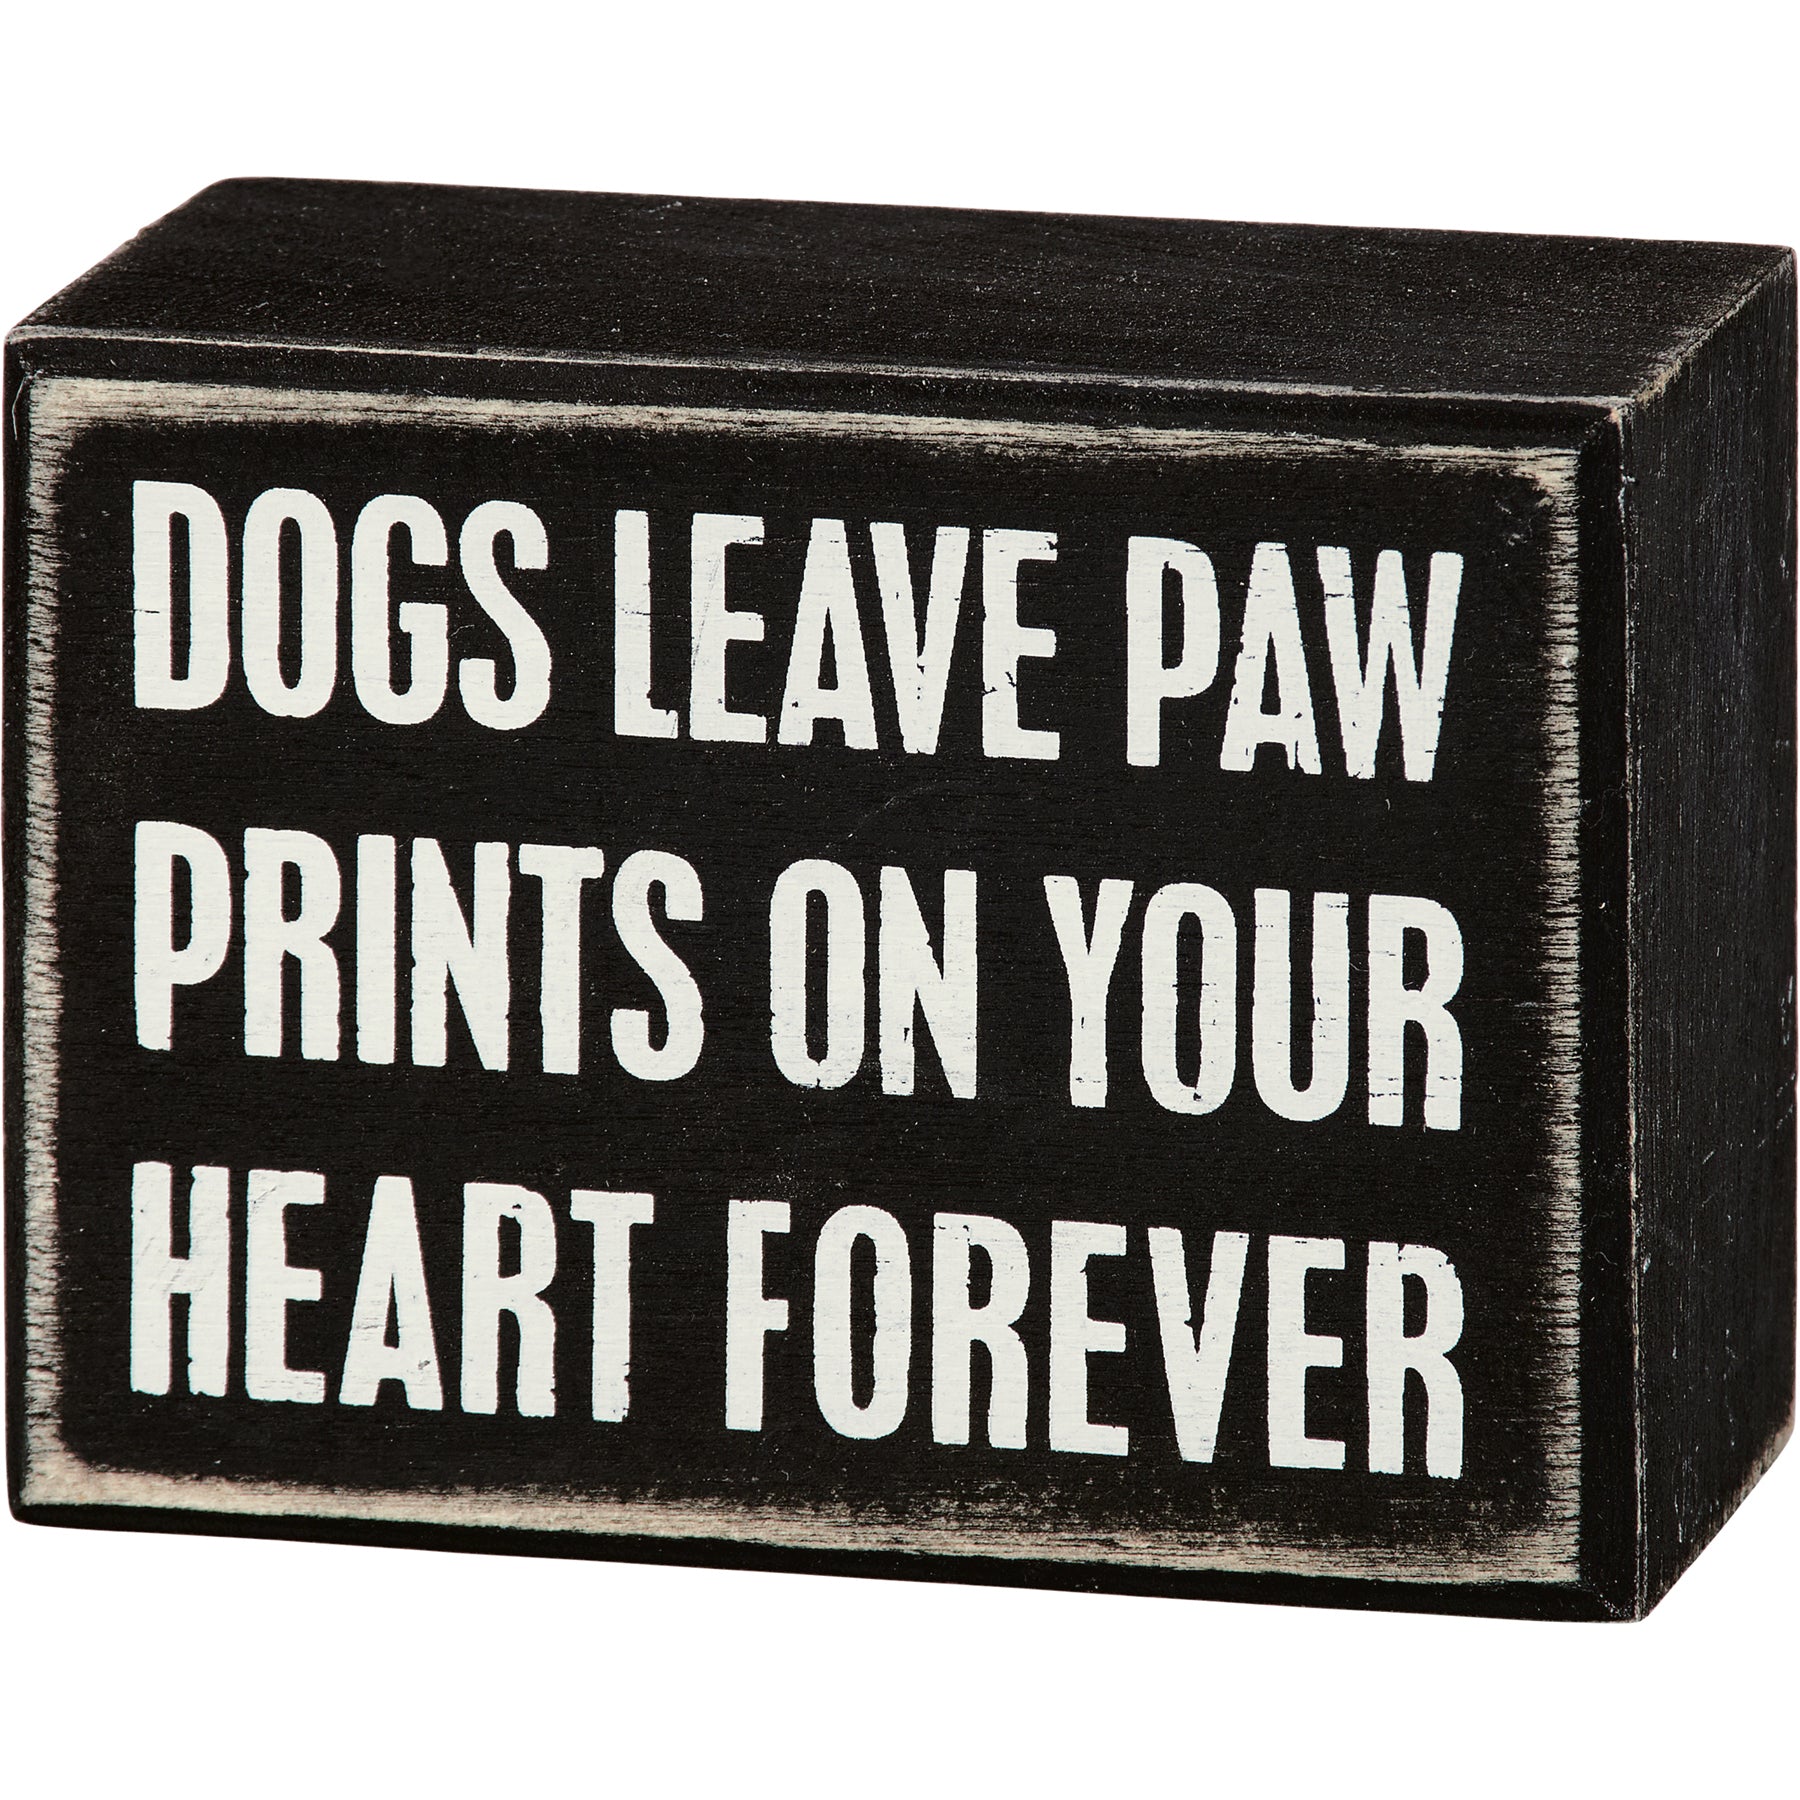 Dogs Leave Paw Prints On Your Heart Forever